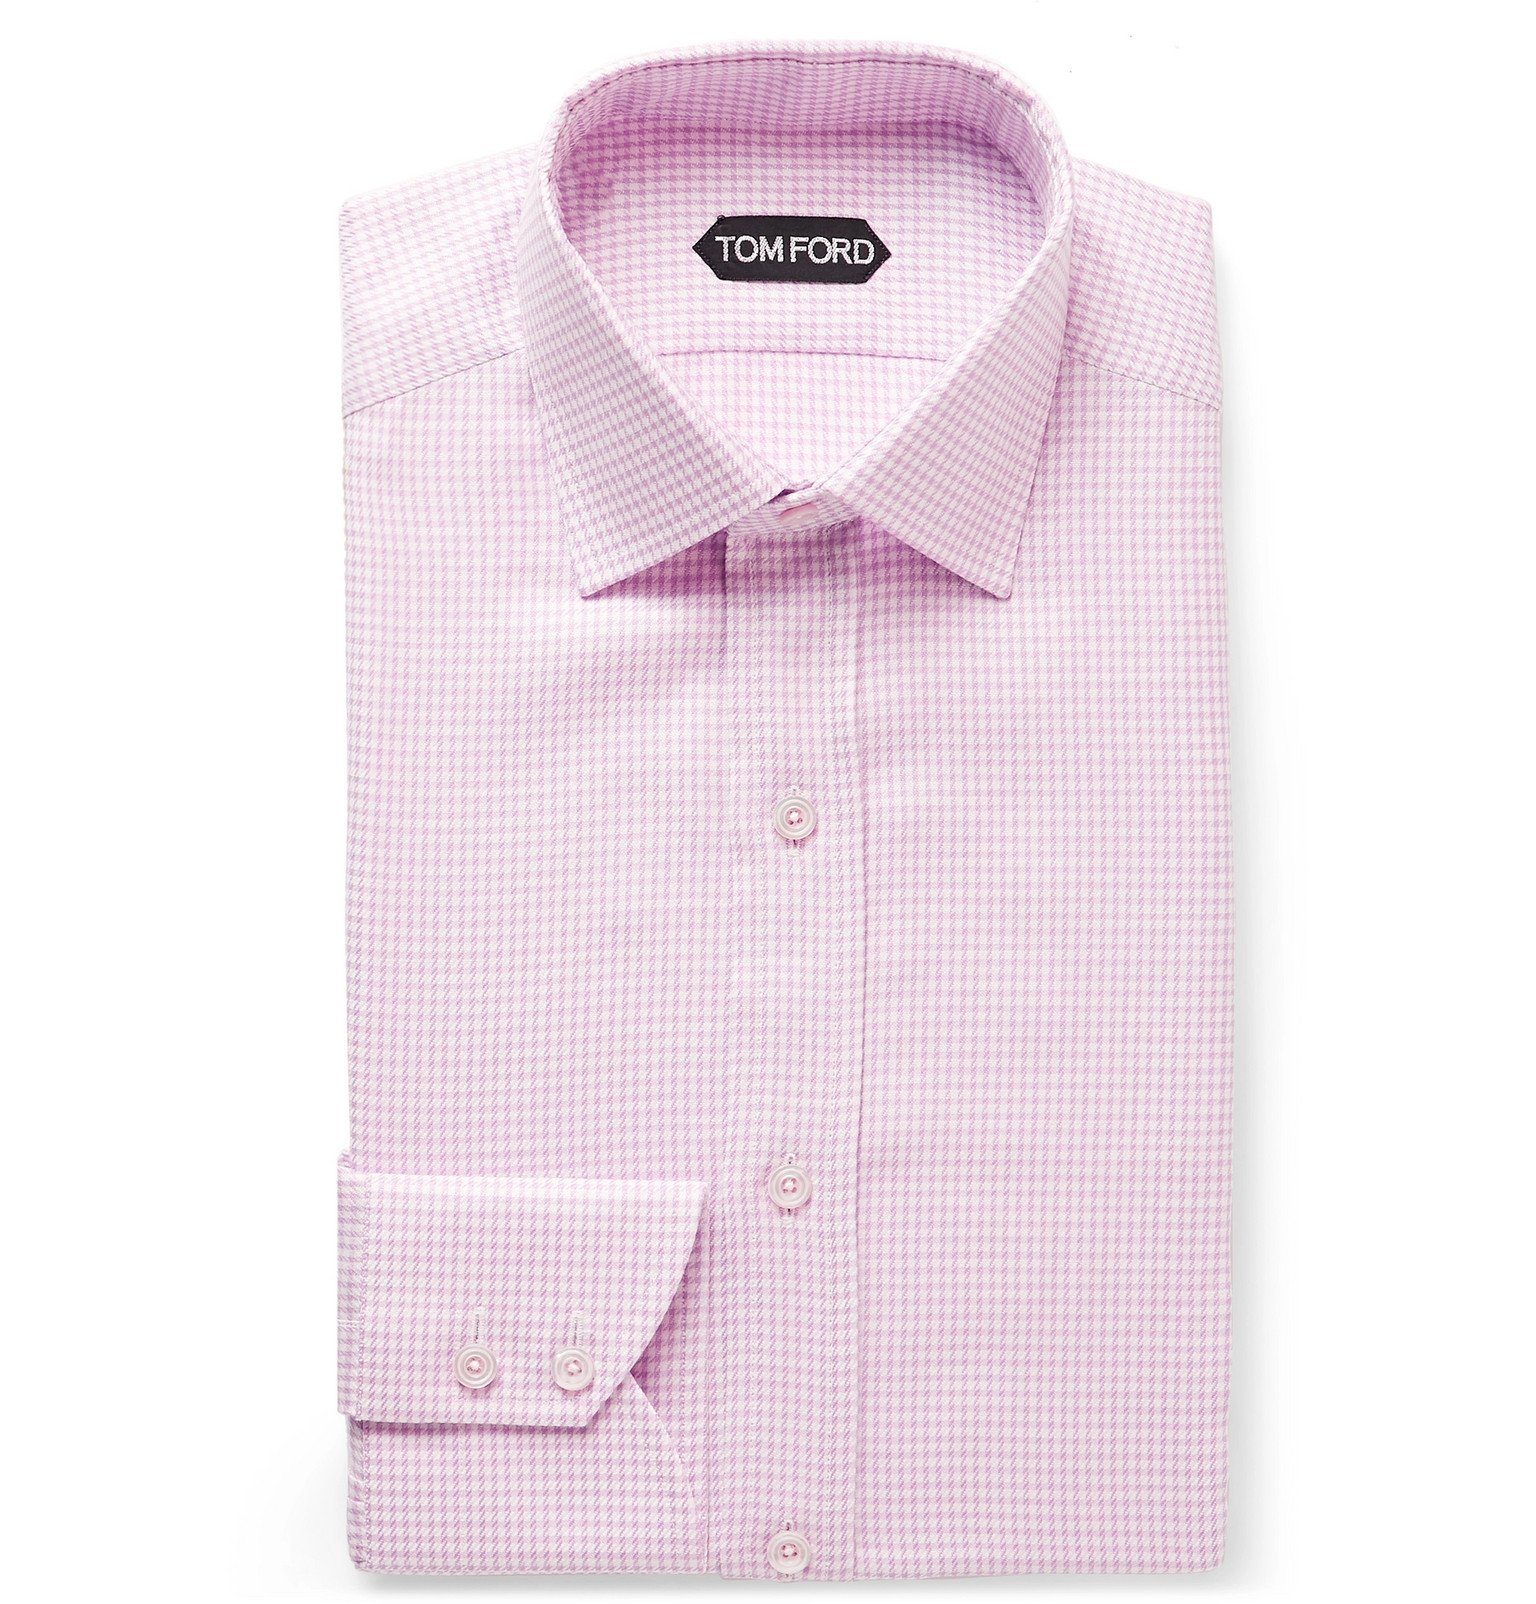 TOM FORD - Pink Slim-Fit Cutaway-Collar Houndstooth Cotton Shirt - Pink TOM  FORD